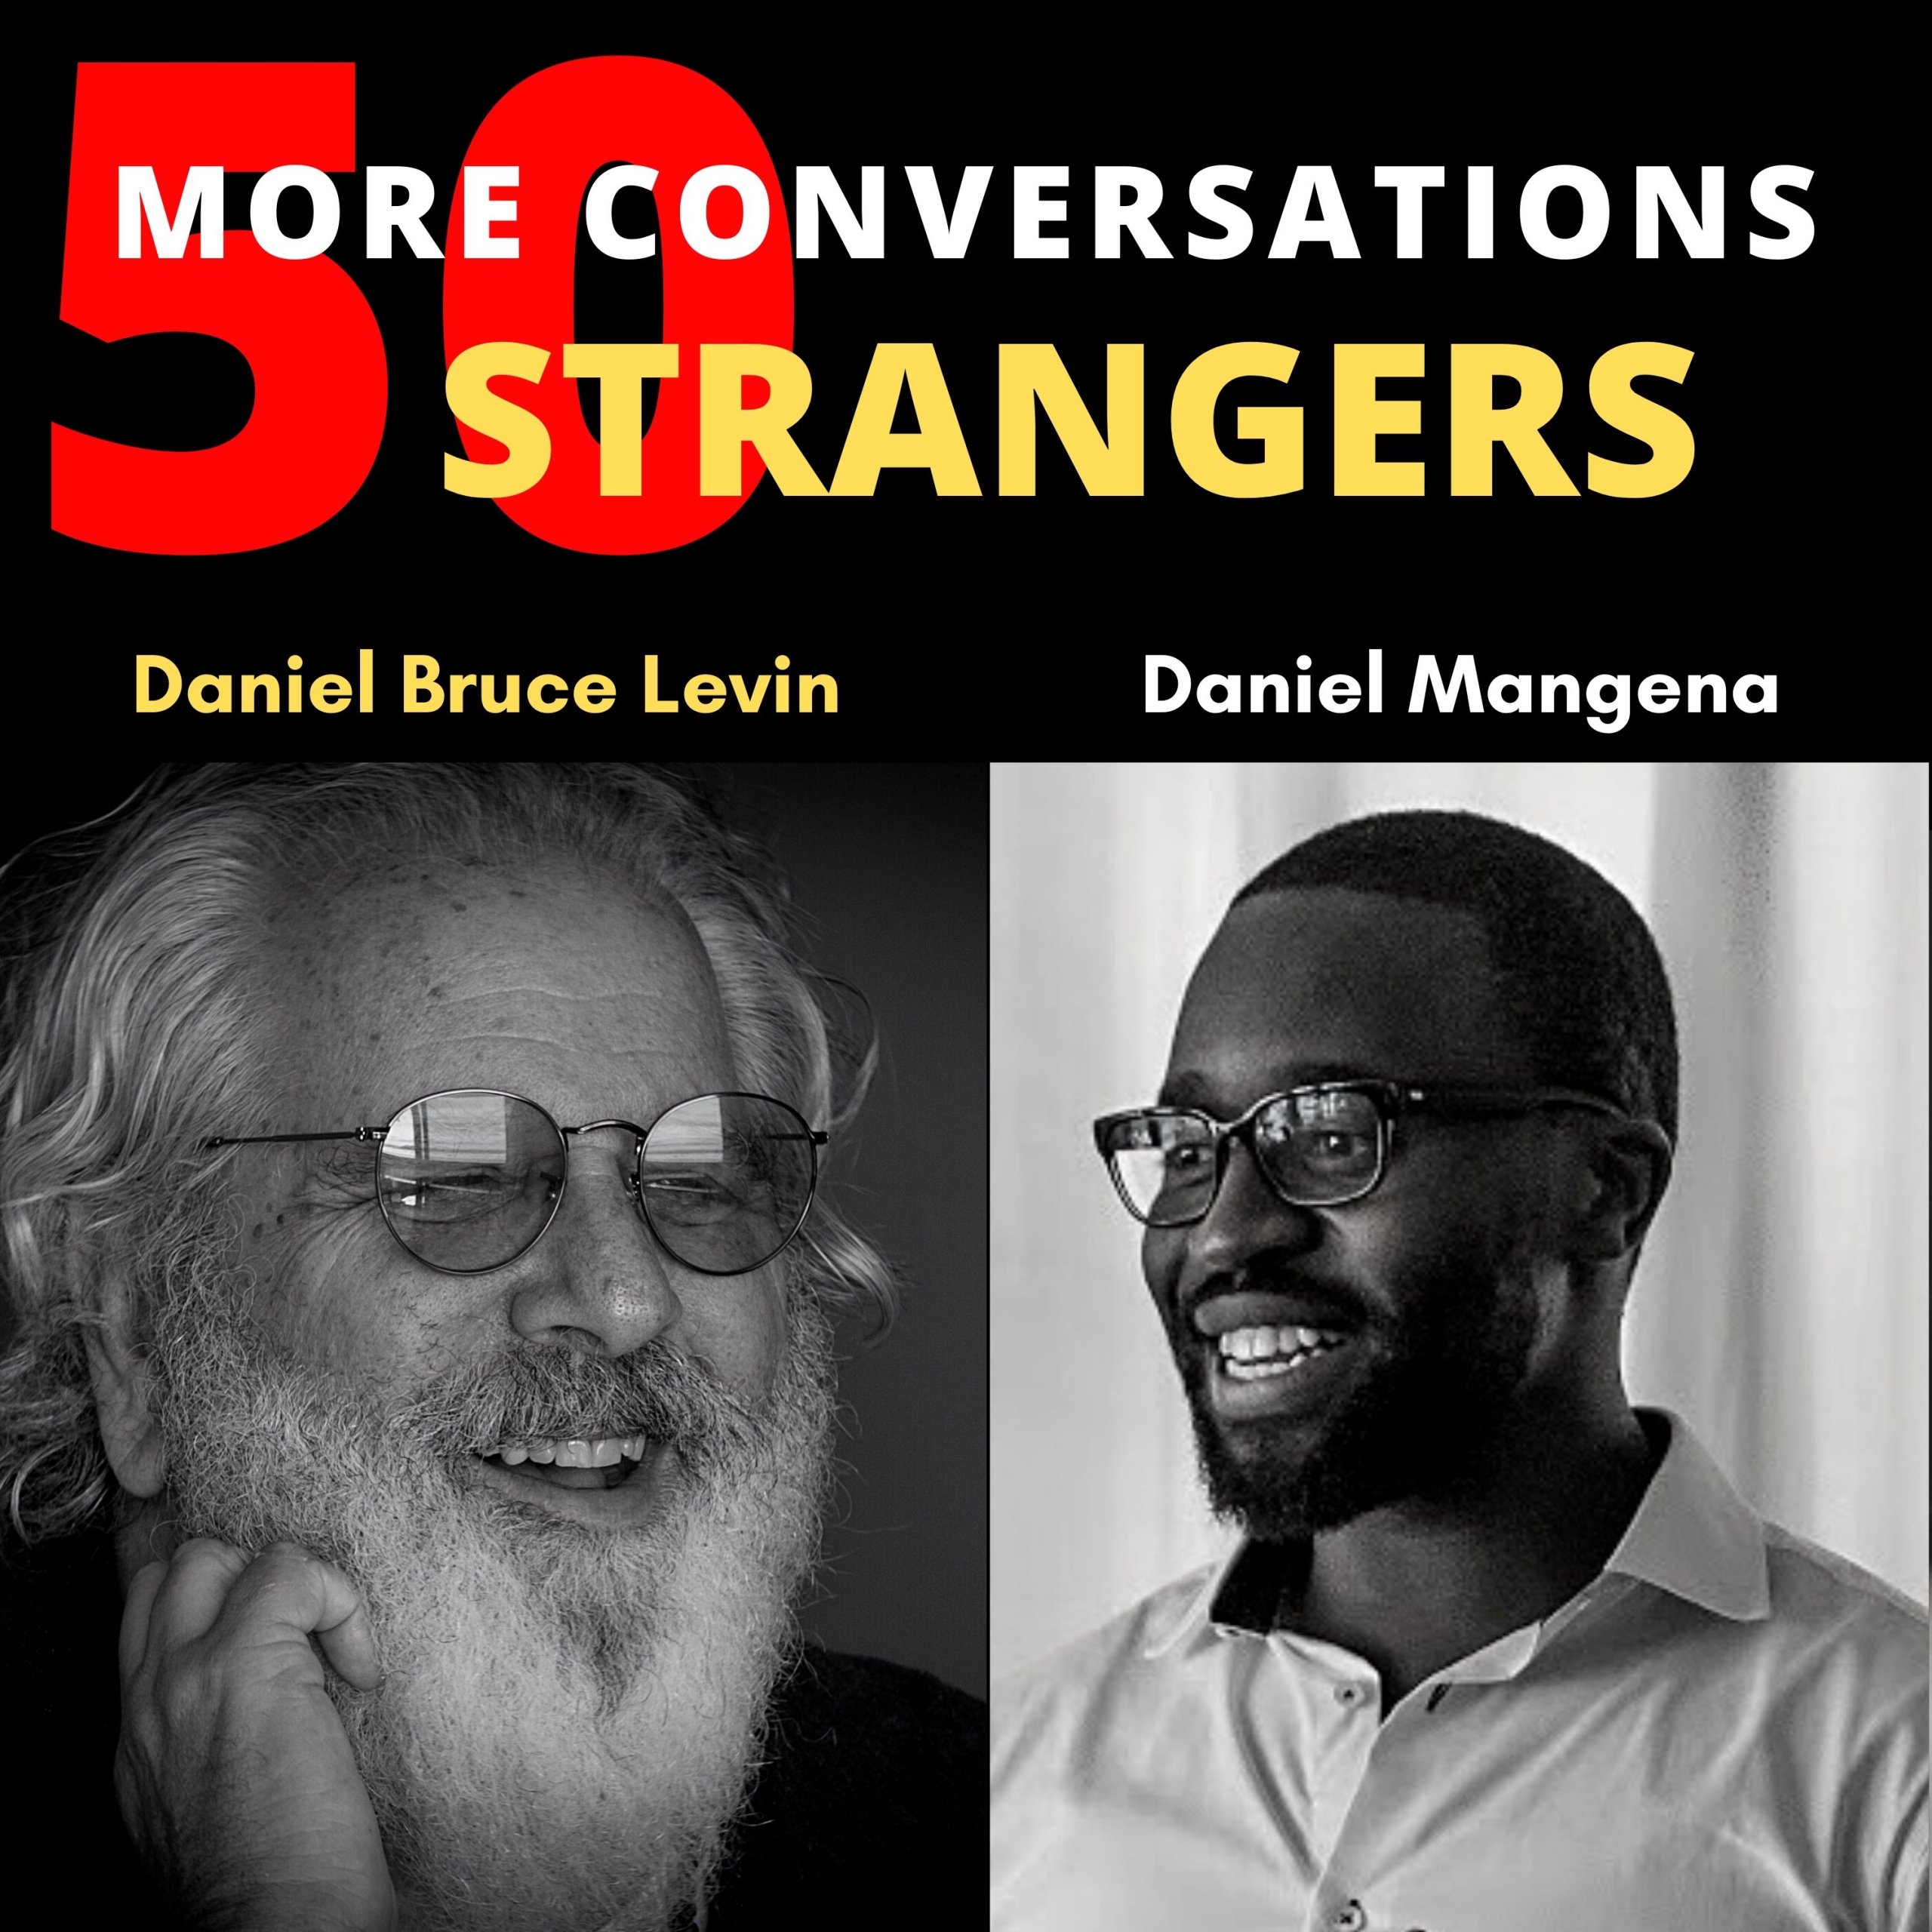 50 More Conversations with 50 More Strangers with Daniel Mangena